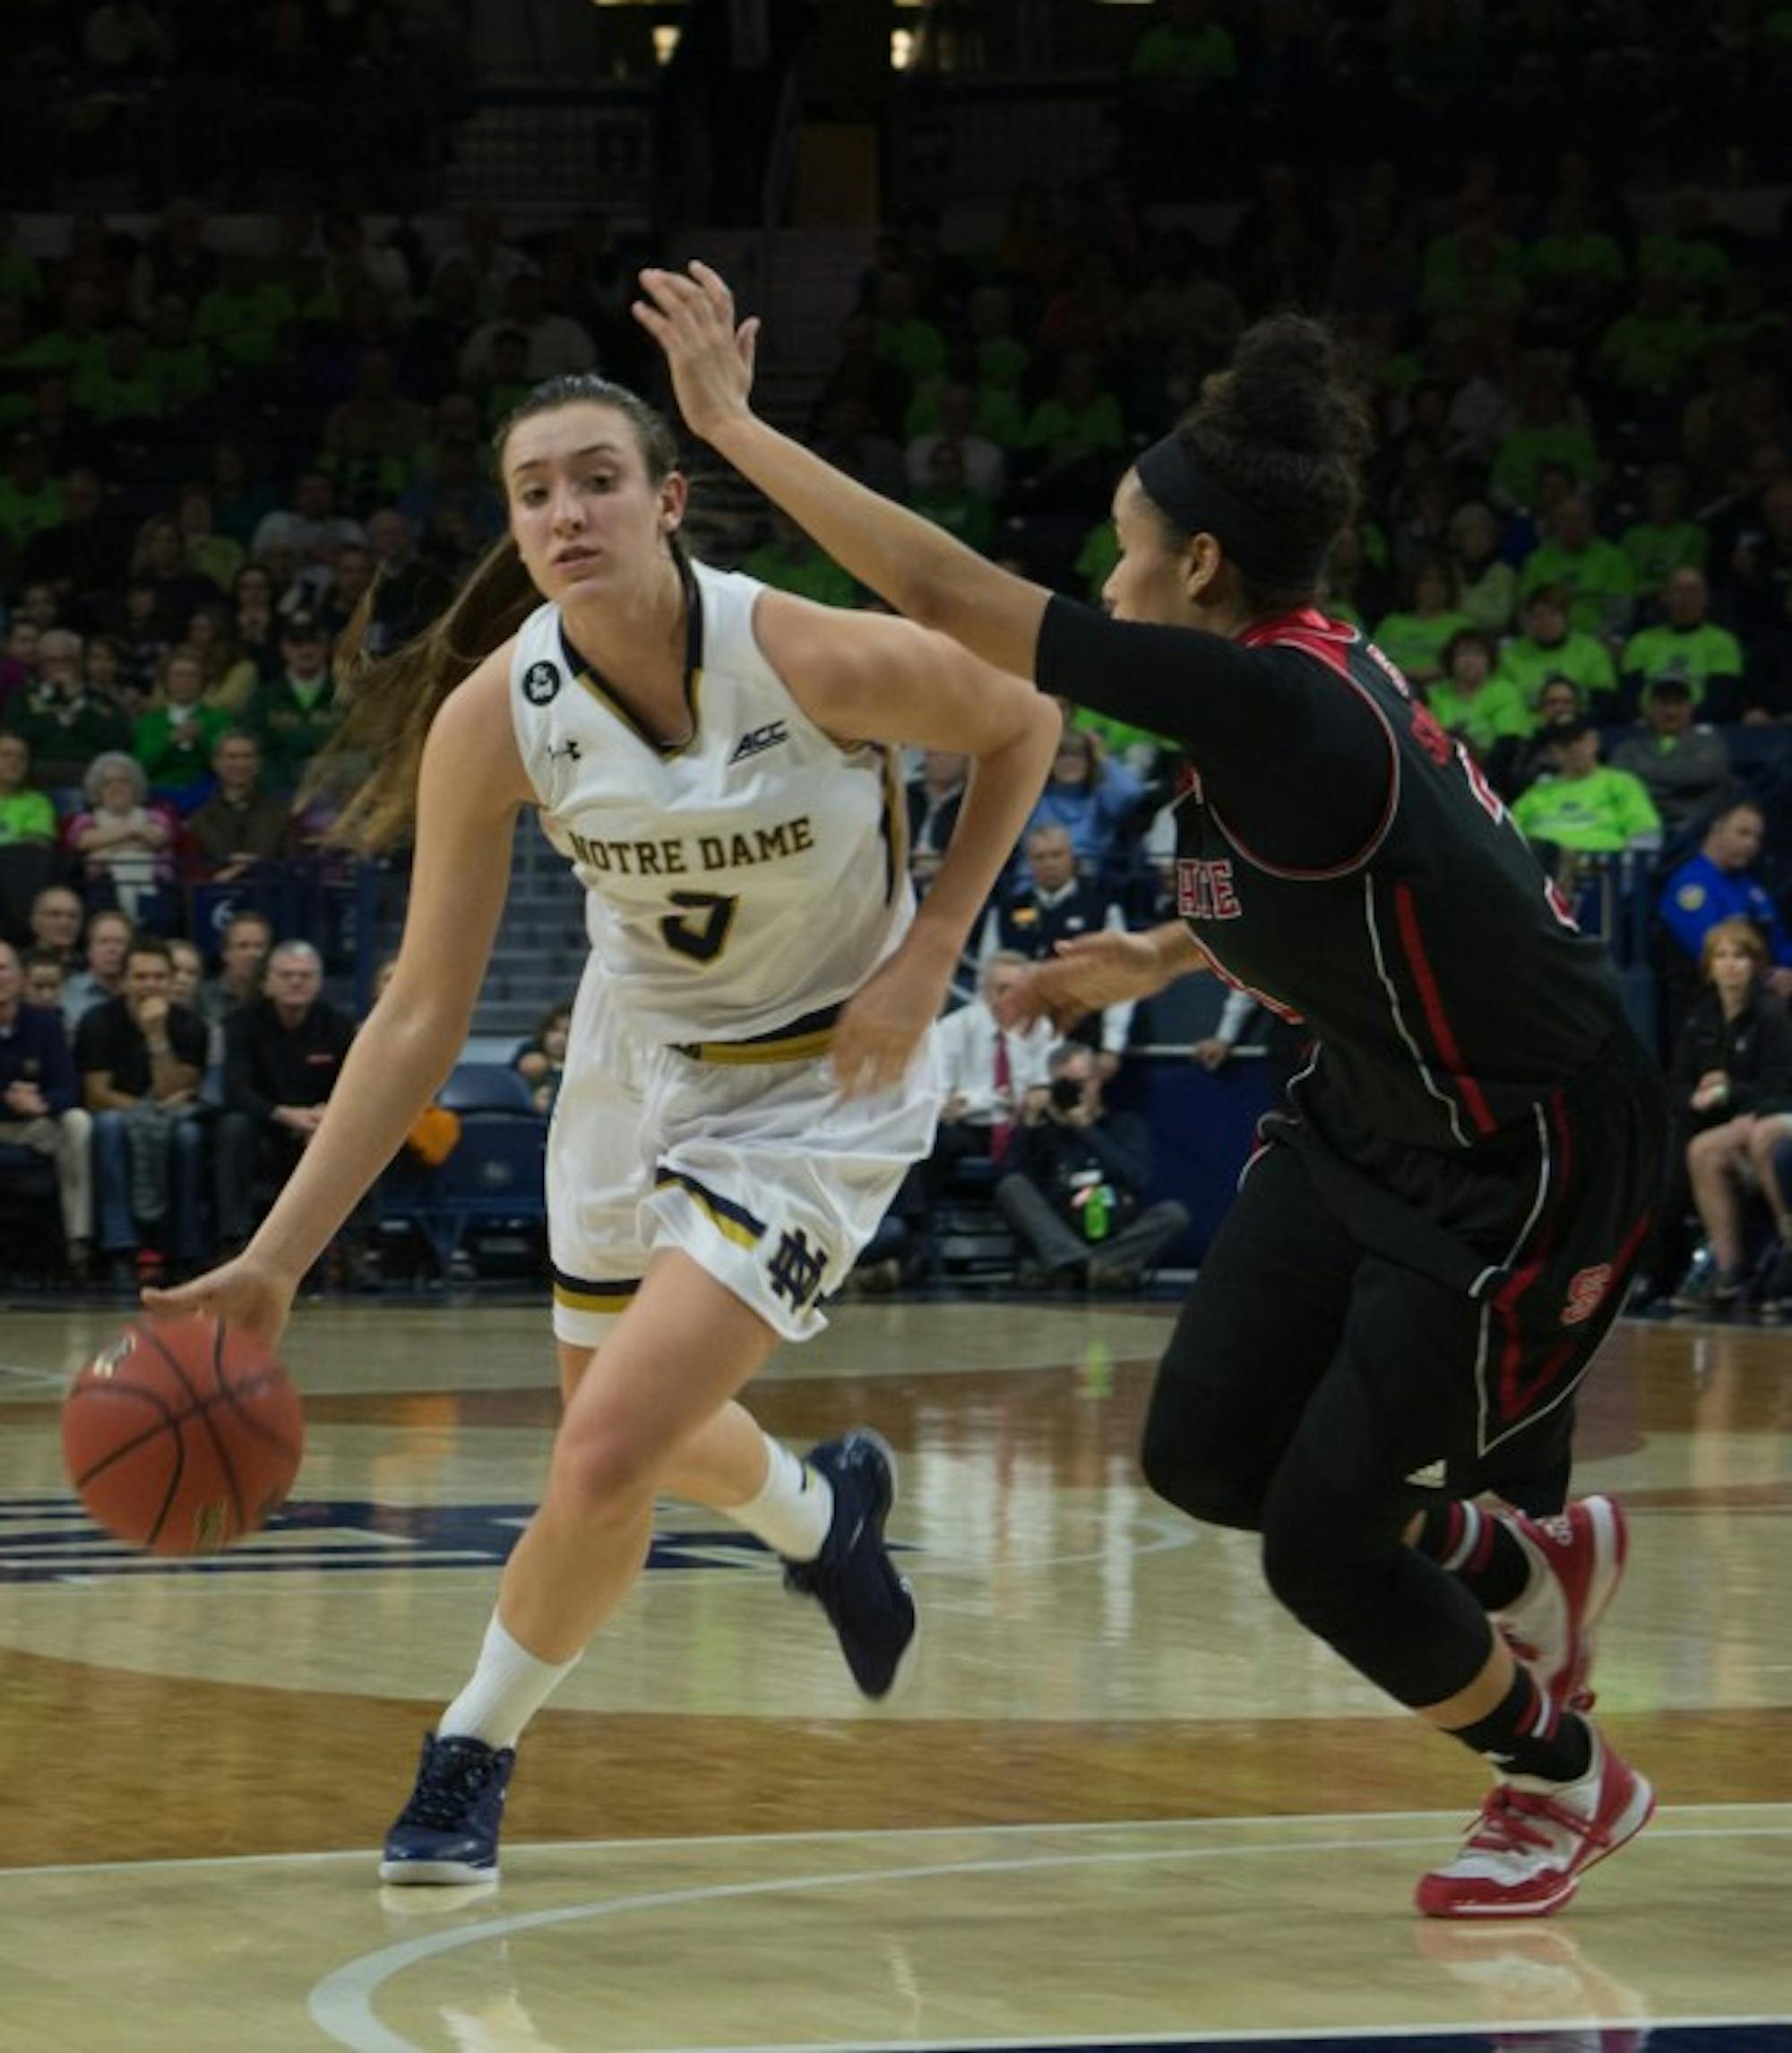 Freshman guard Marina Mabrey dribbles past a North Carolina State defender during Notre Dame’s 82-46 victory Feb. 4. The Irish will host conference foe Miami (Fla.) at Purcell Pavilion on Sunday.